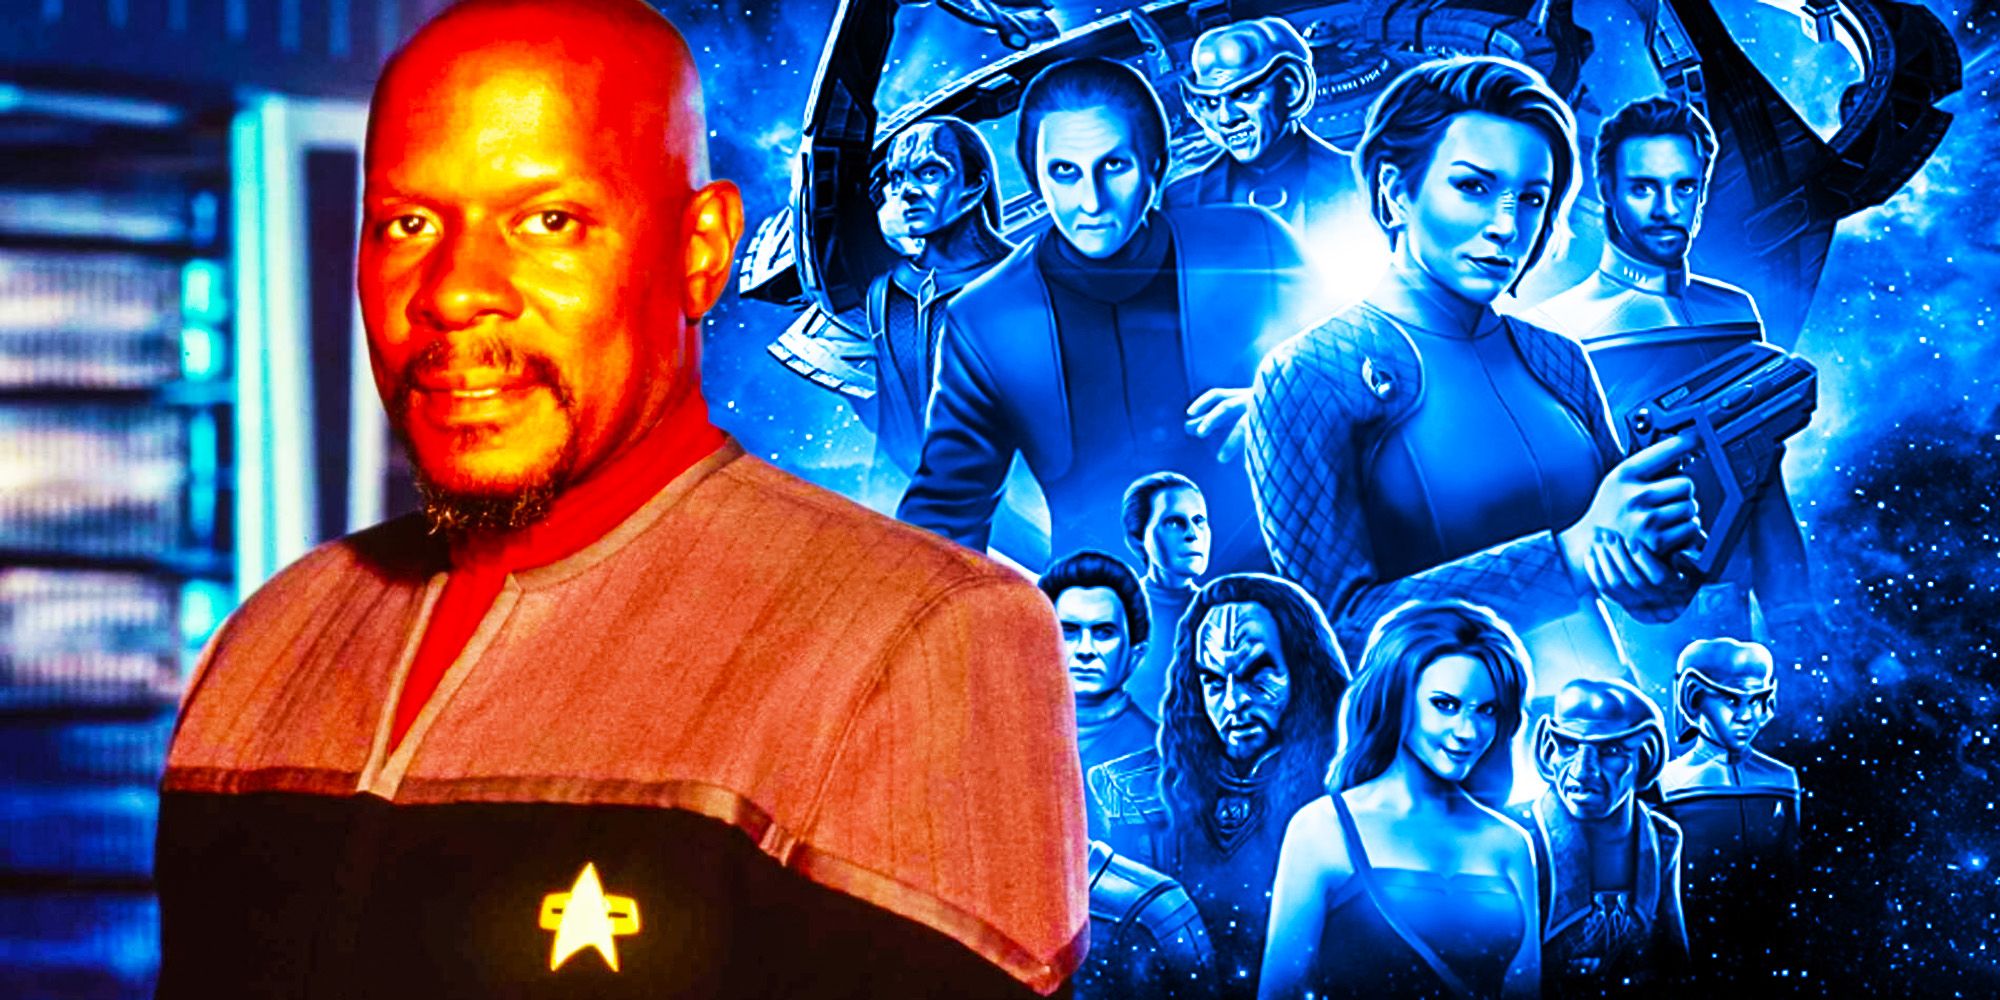 Deep space nine sisko what other characters can return